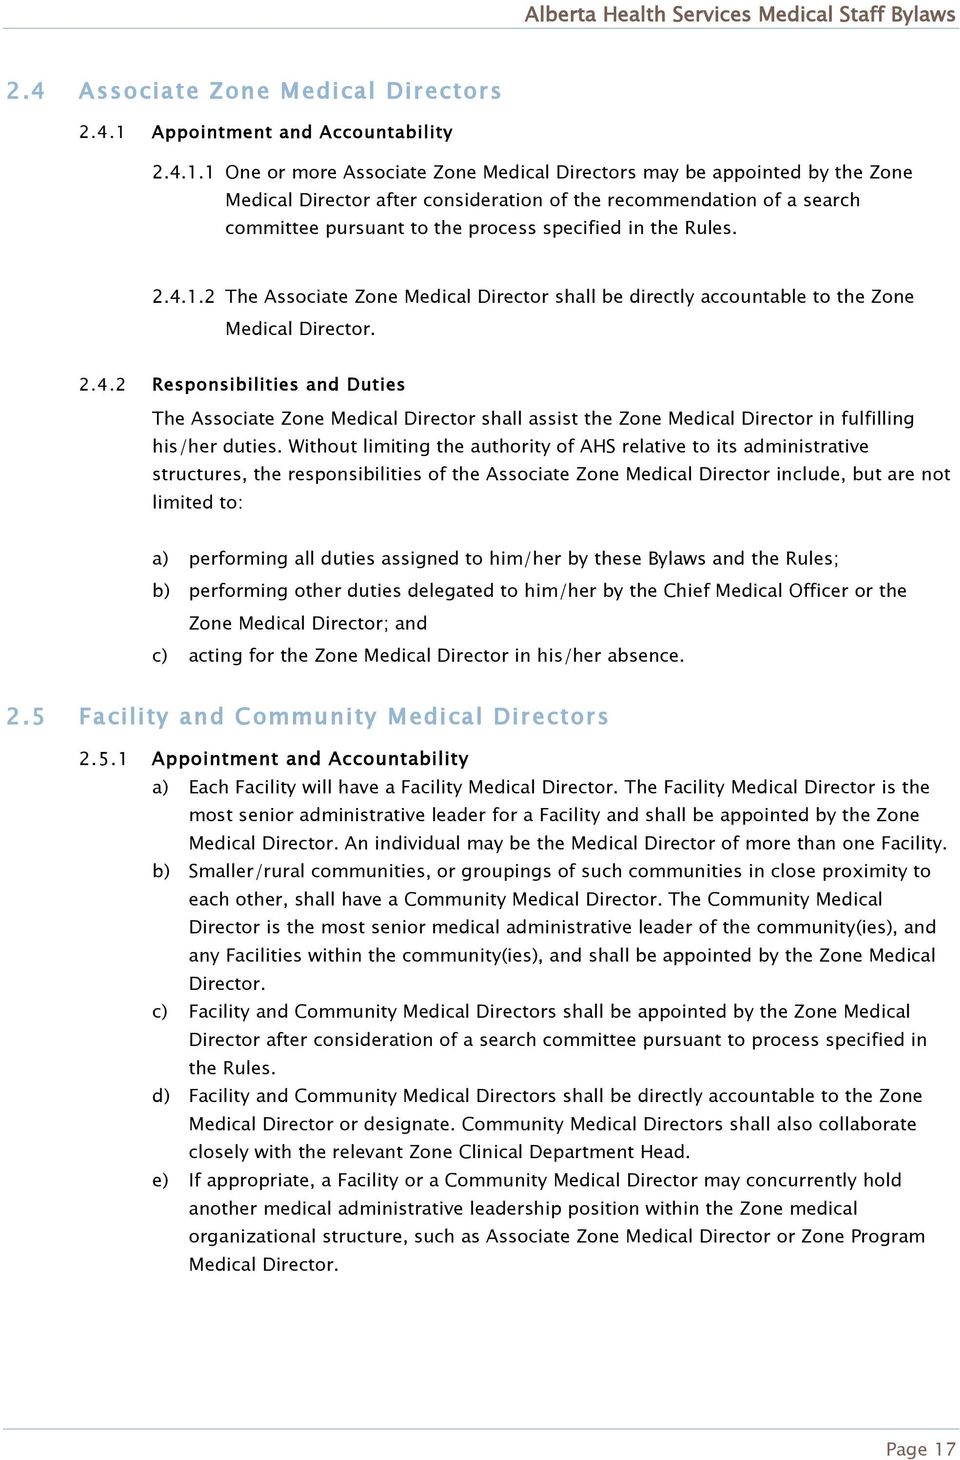 1 One or more Associate Zone Medical Directors may be appointed by the Zone Medical Director after consideration of the recommendation of a search committee pursuant to the process specified in the